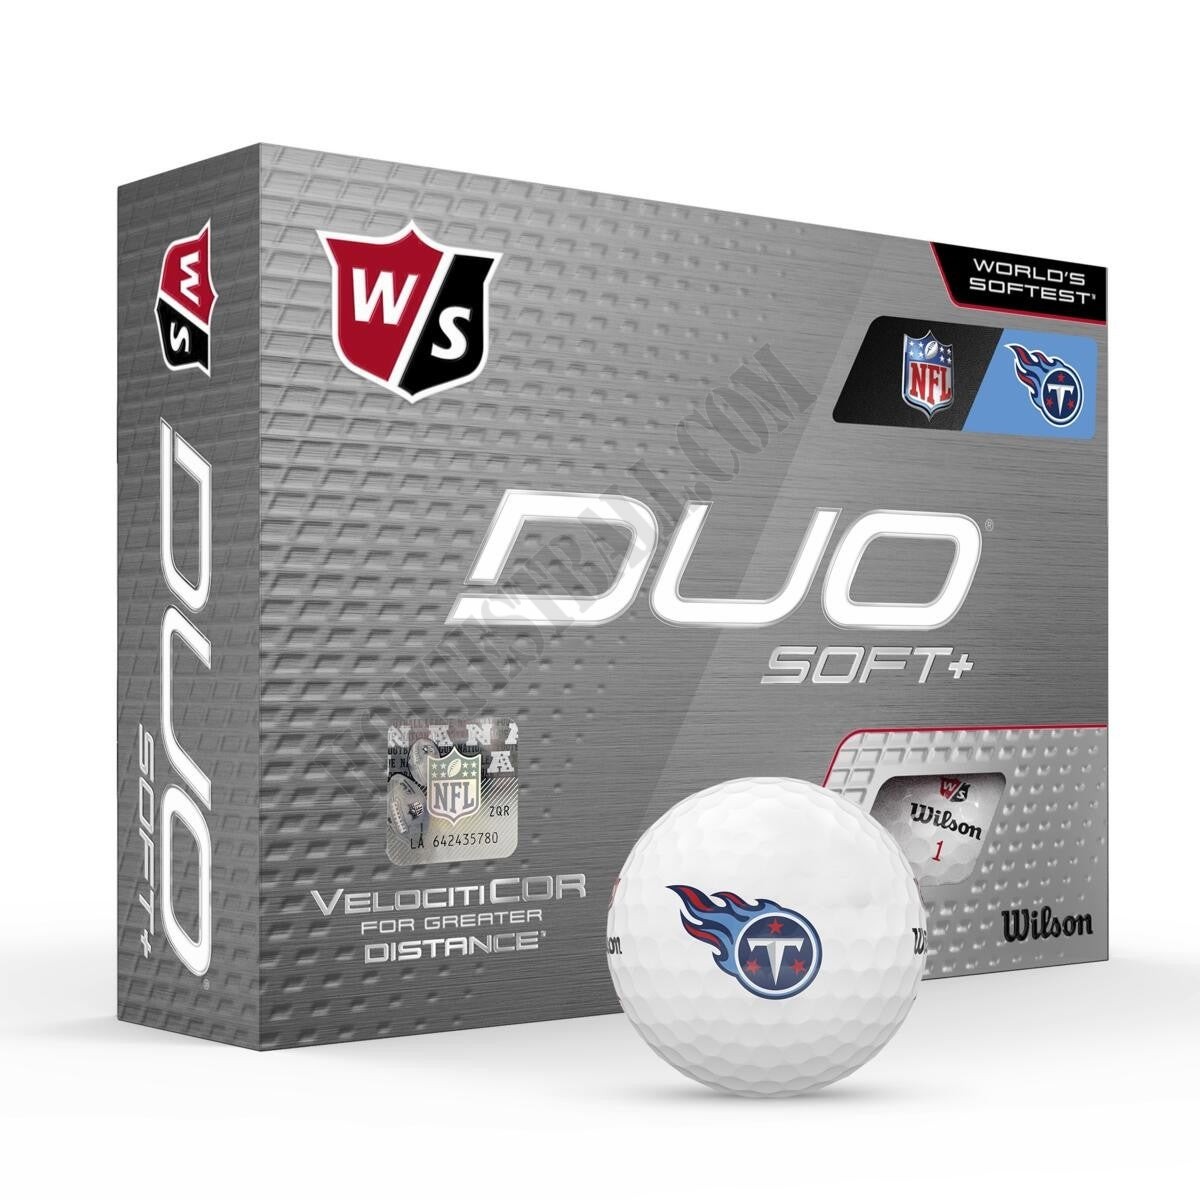 Duo Soft+ NFL Golf Balls - Tennessee Titans ● Wilson Promotions - -0